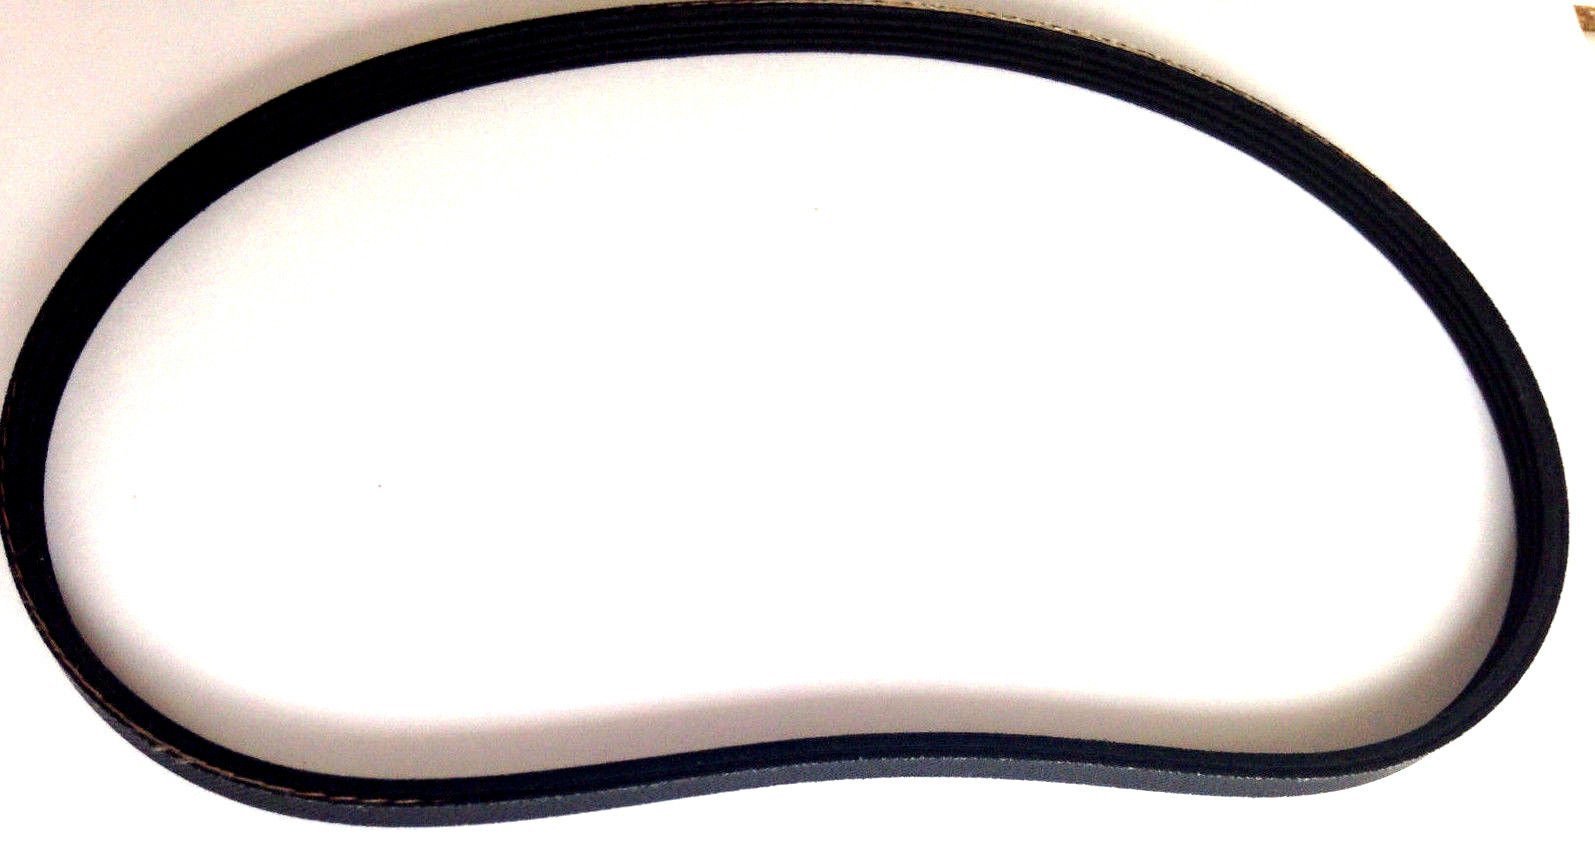 *New Replacement BELT* for use with Goldstar Bread Maker model HB-026E 